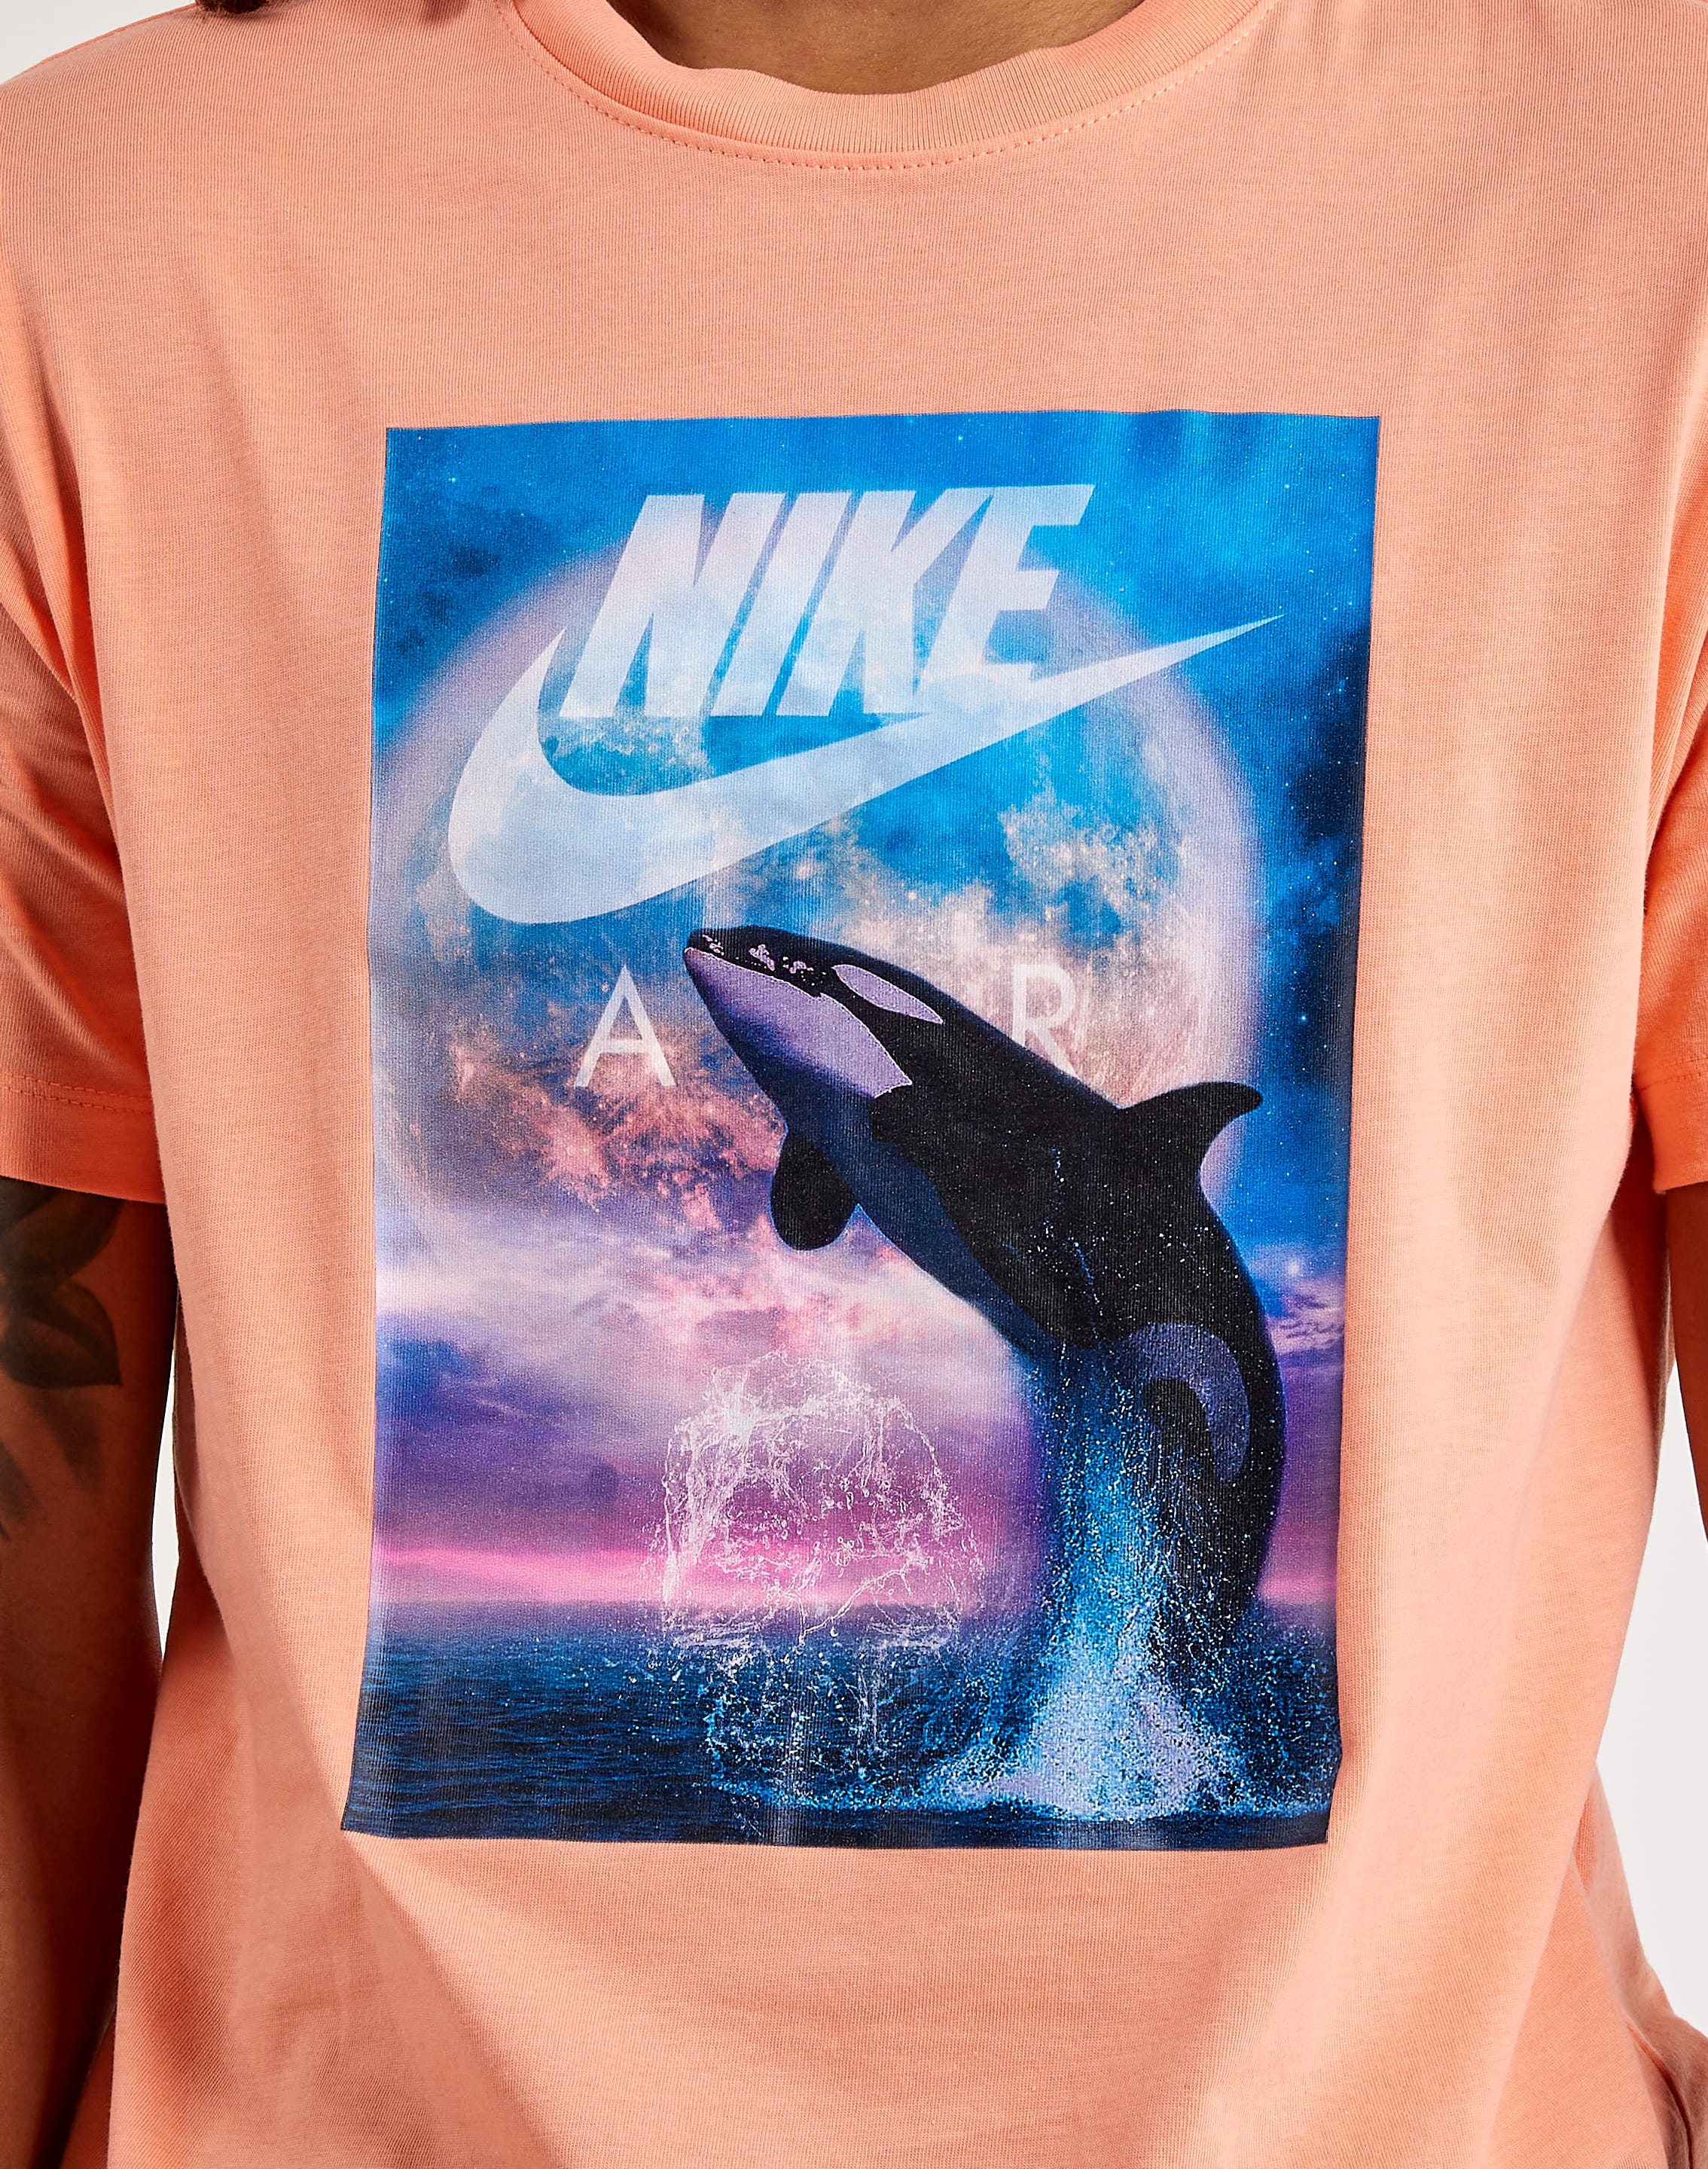 Nike Whale Photo Tee – DTLR